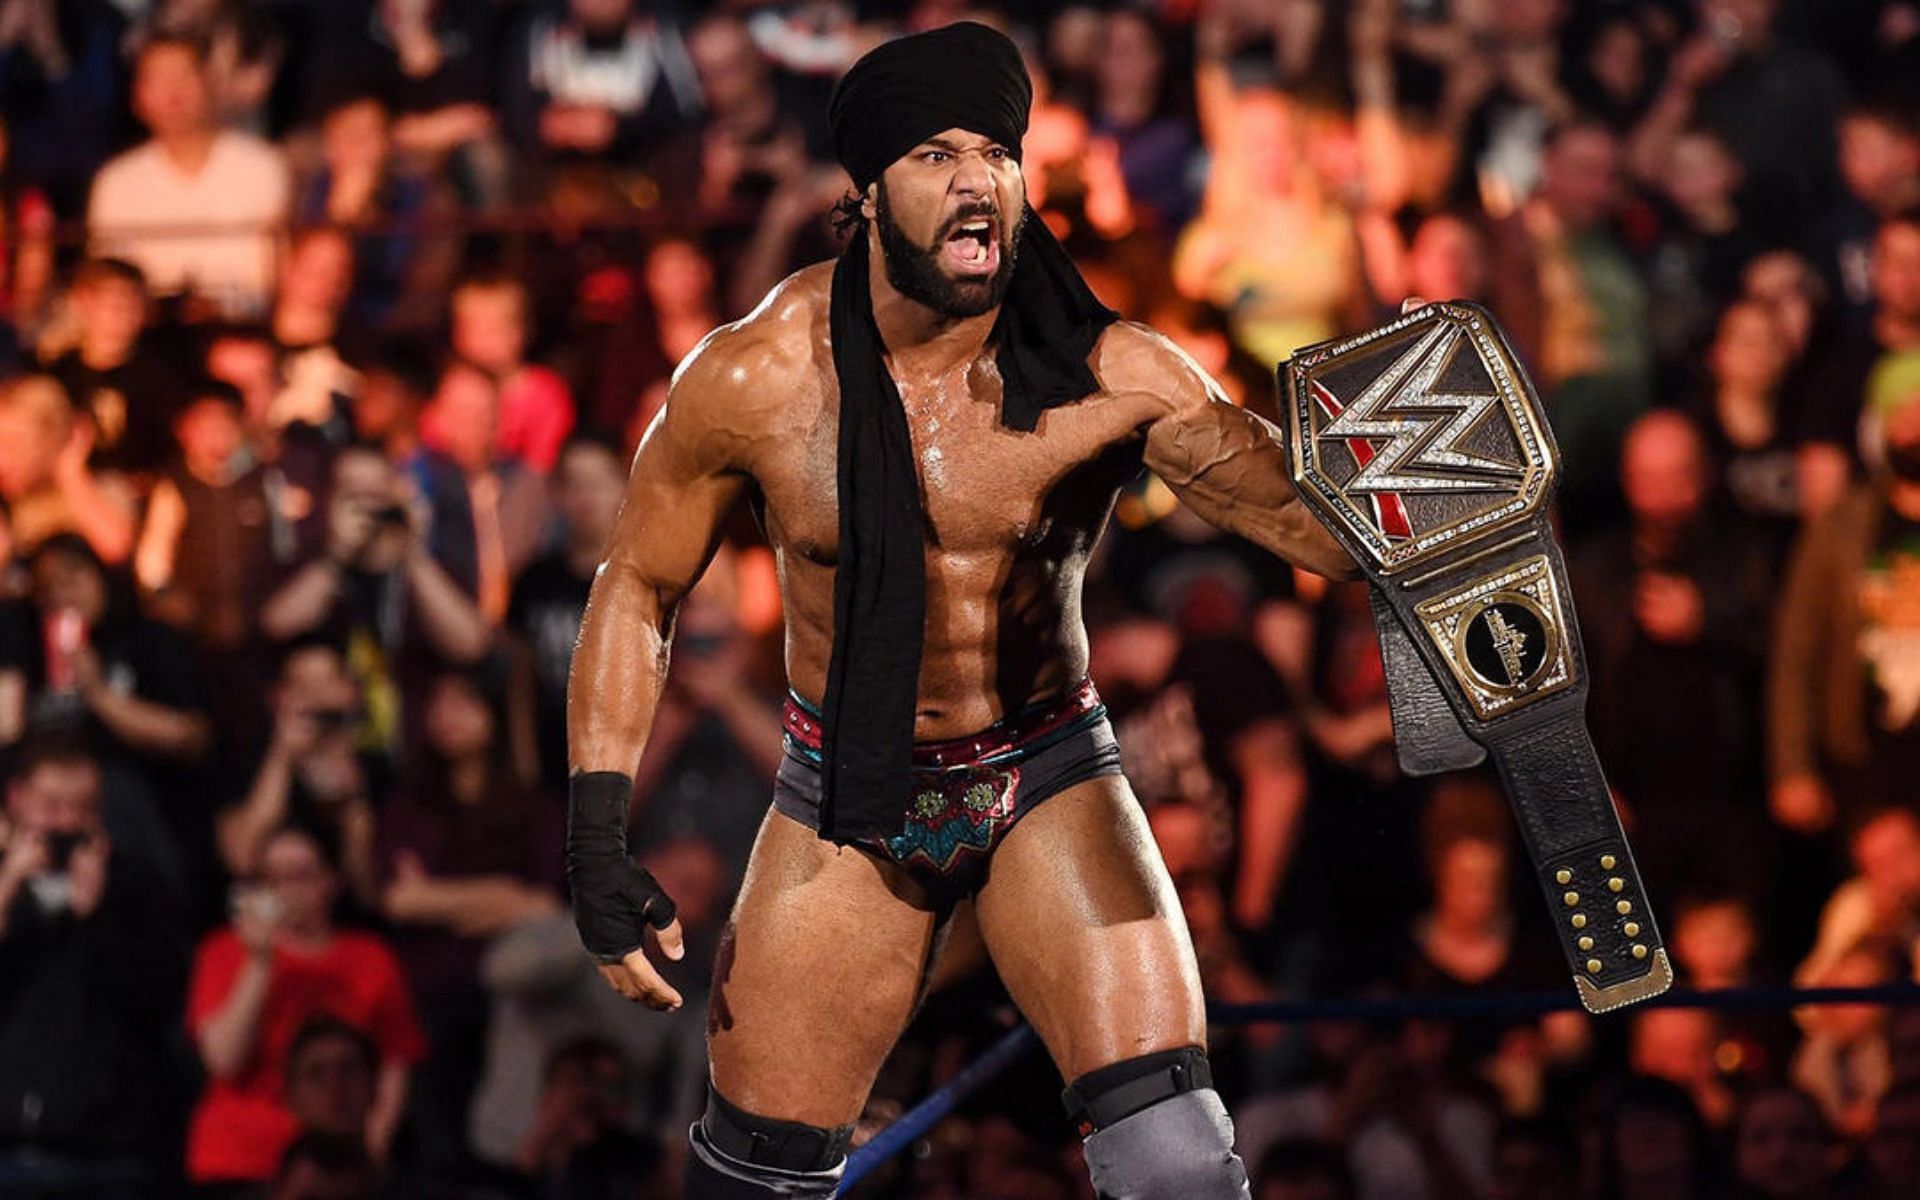 Jinder Mahal is trying to climb his way back to the top!